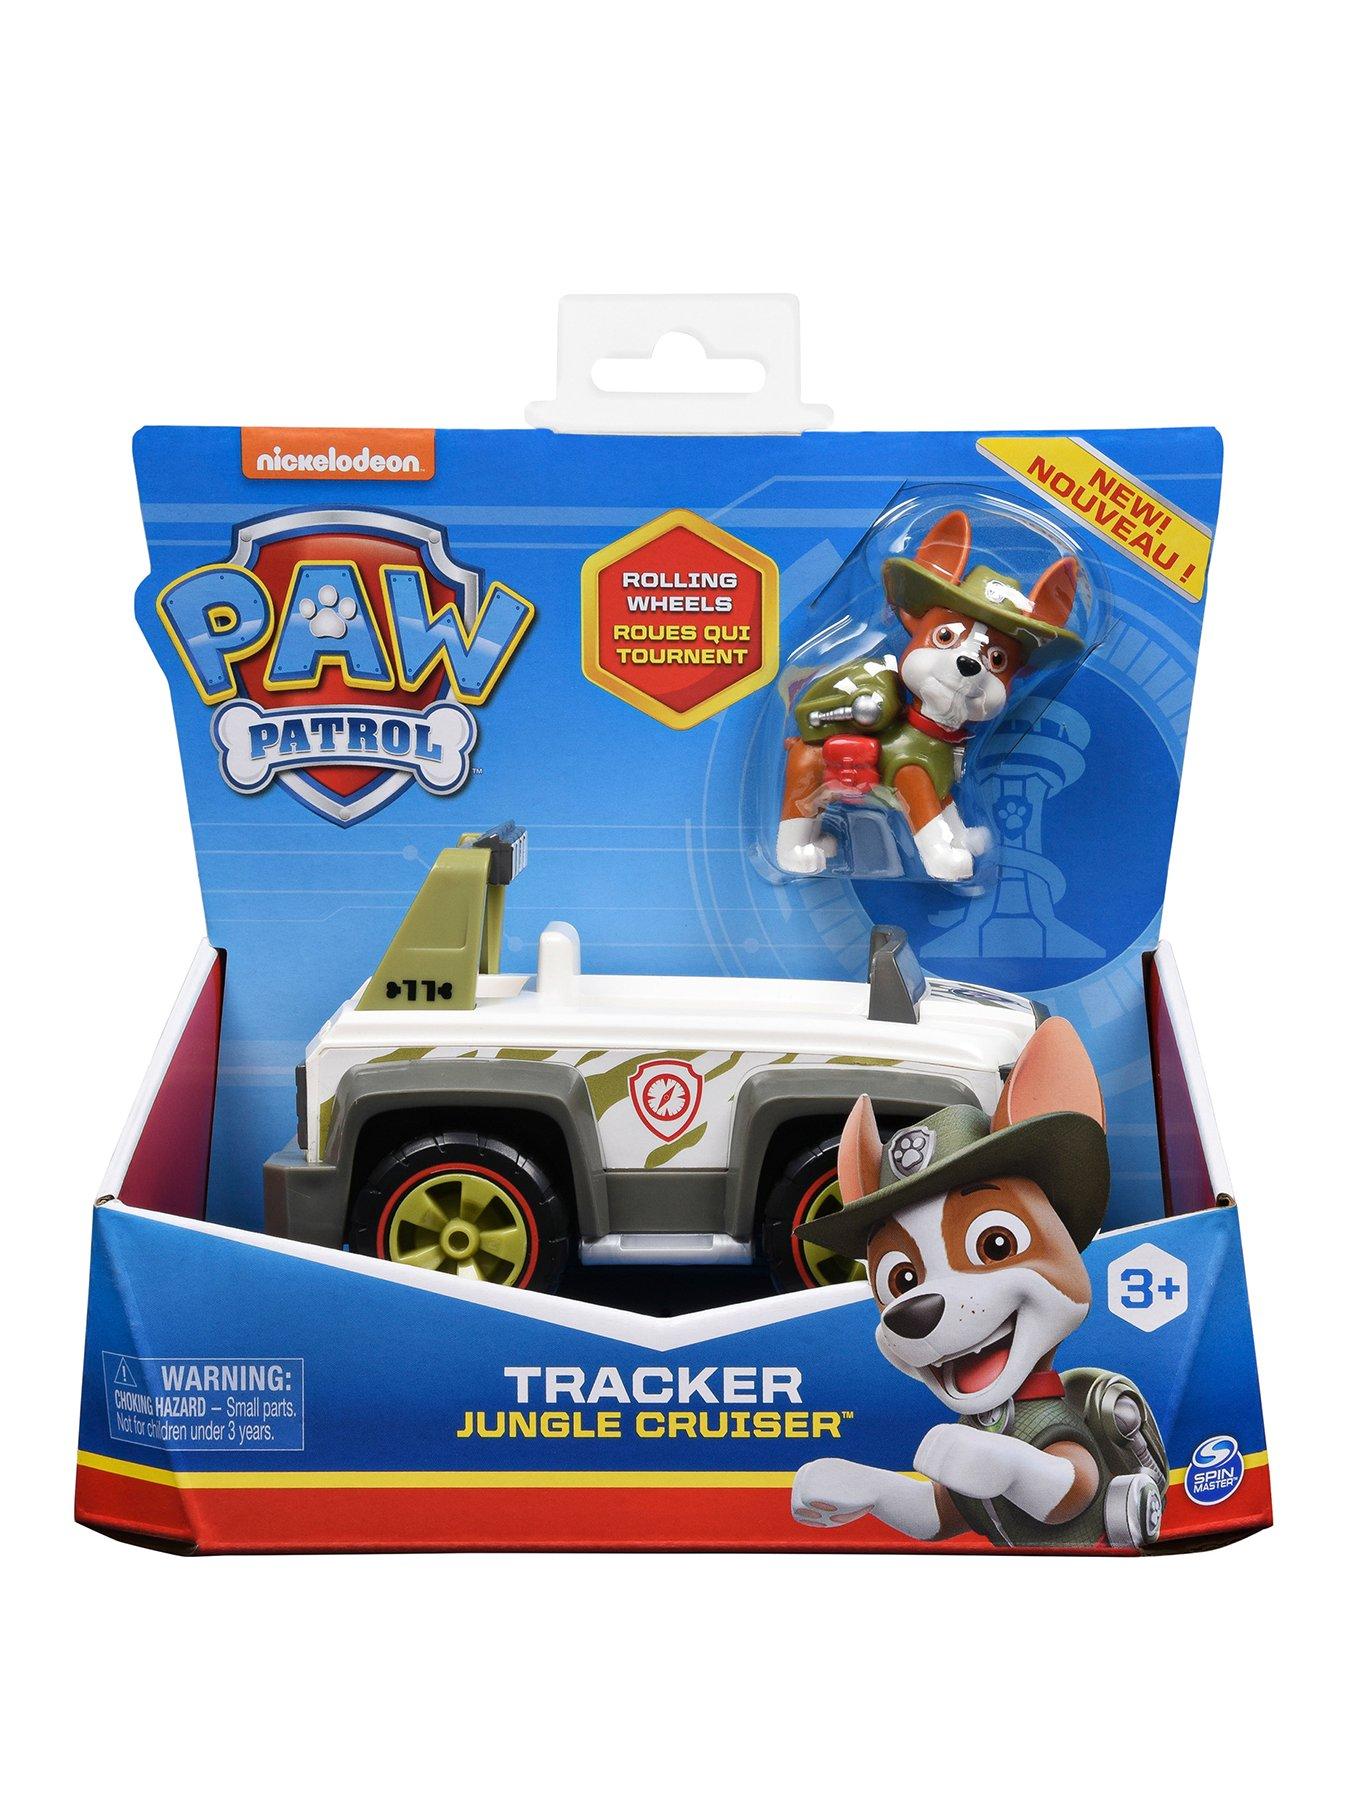 Paw Patrol Vehicle with - Tracker | Very